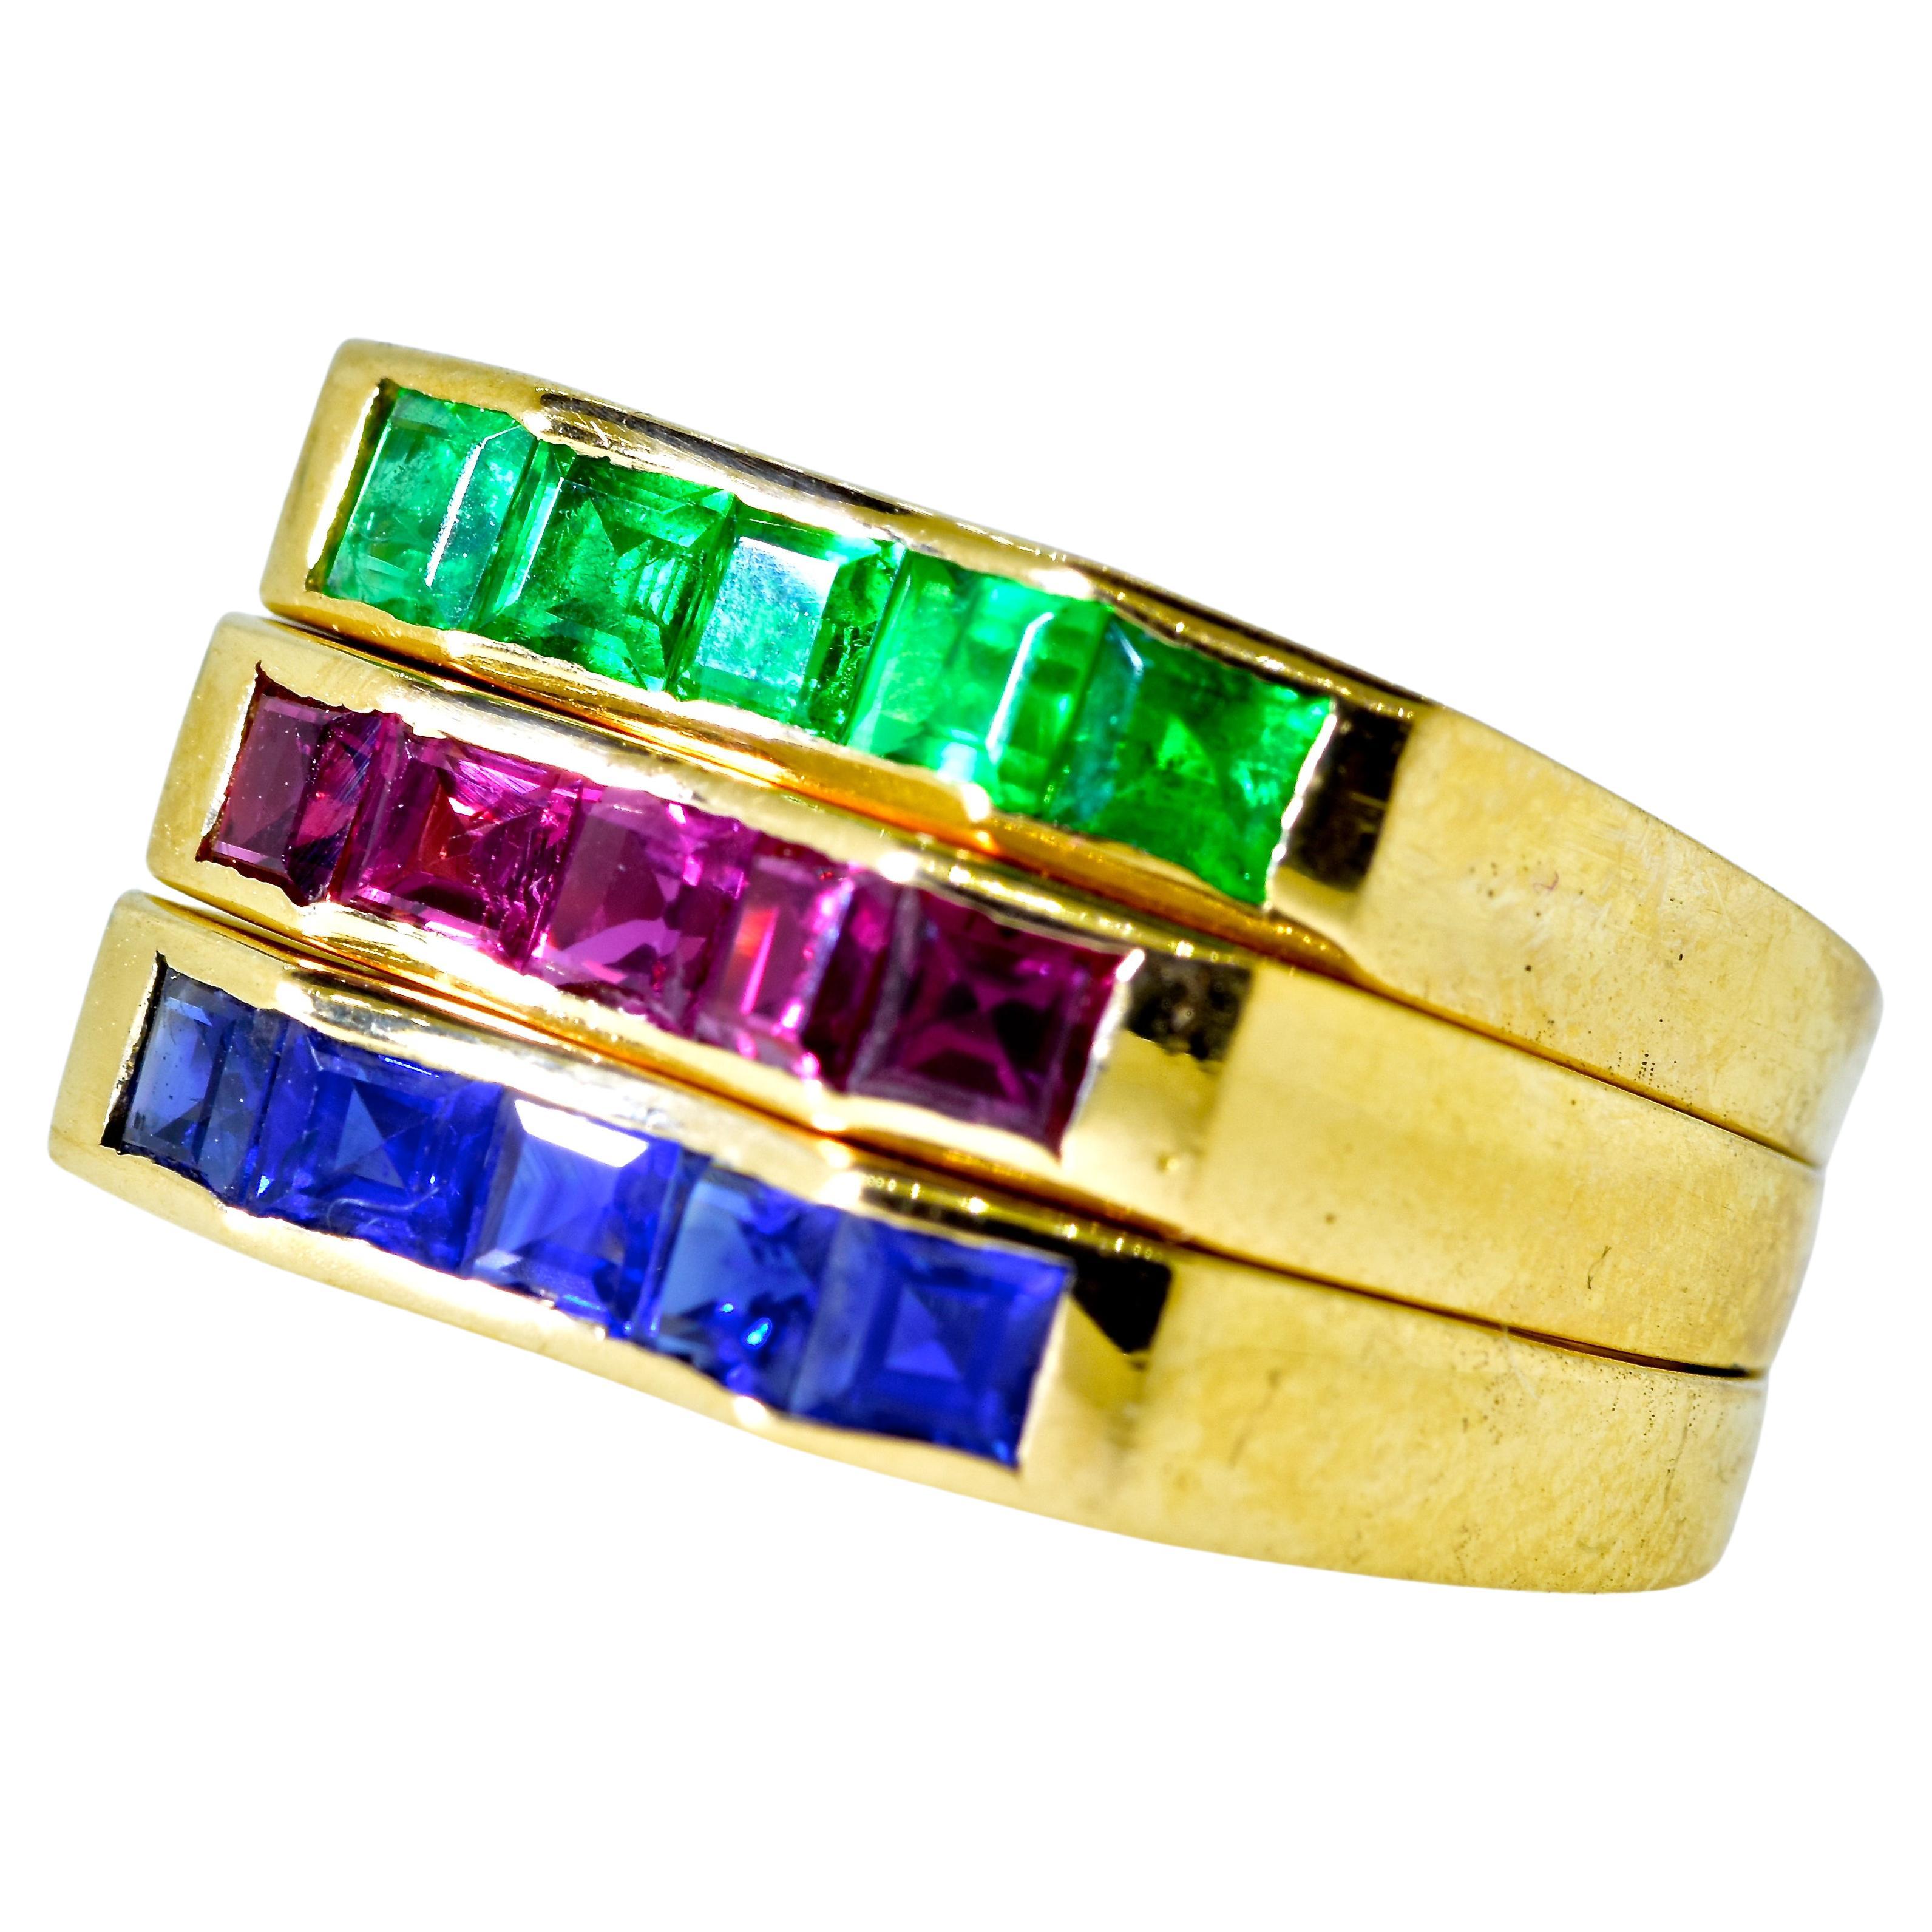 Oscar Heyman 18K yellow gold rings with very fine fancy cut natural Ruby, Sapphire and Emerald.  All of these natural stones are of the finest quality,  The Ruby band possesses 5 square cut natural rubies estimated to weigh .80 cts., the Sapphire